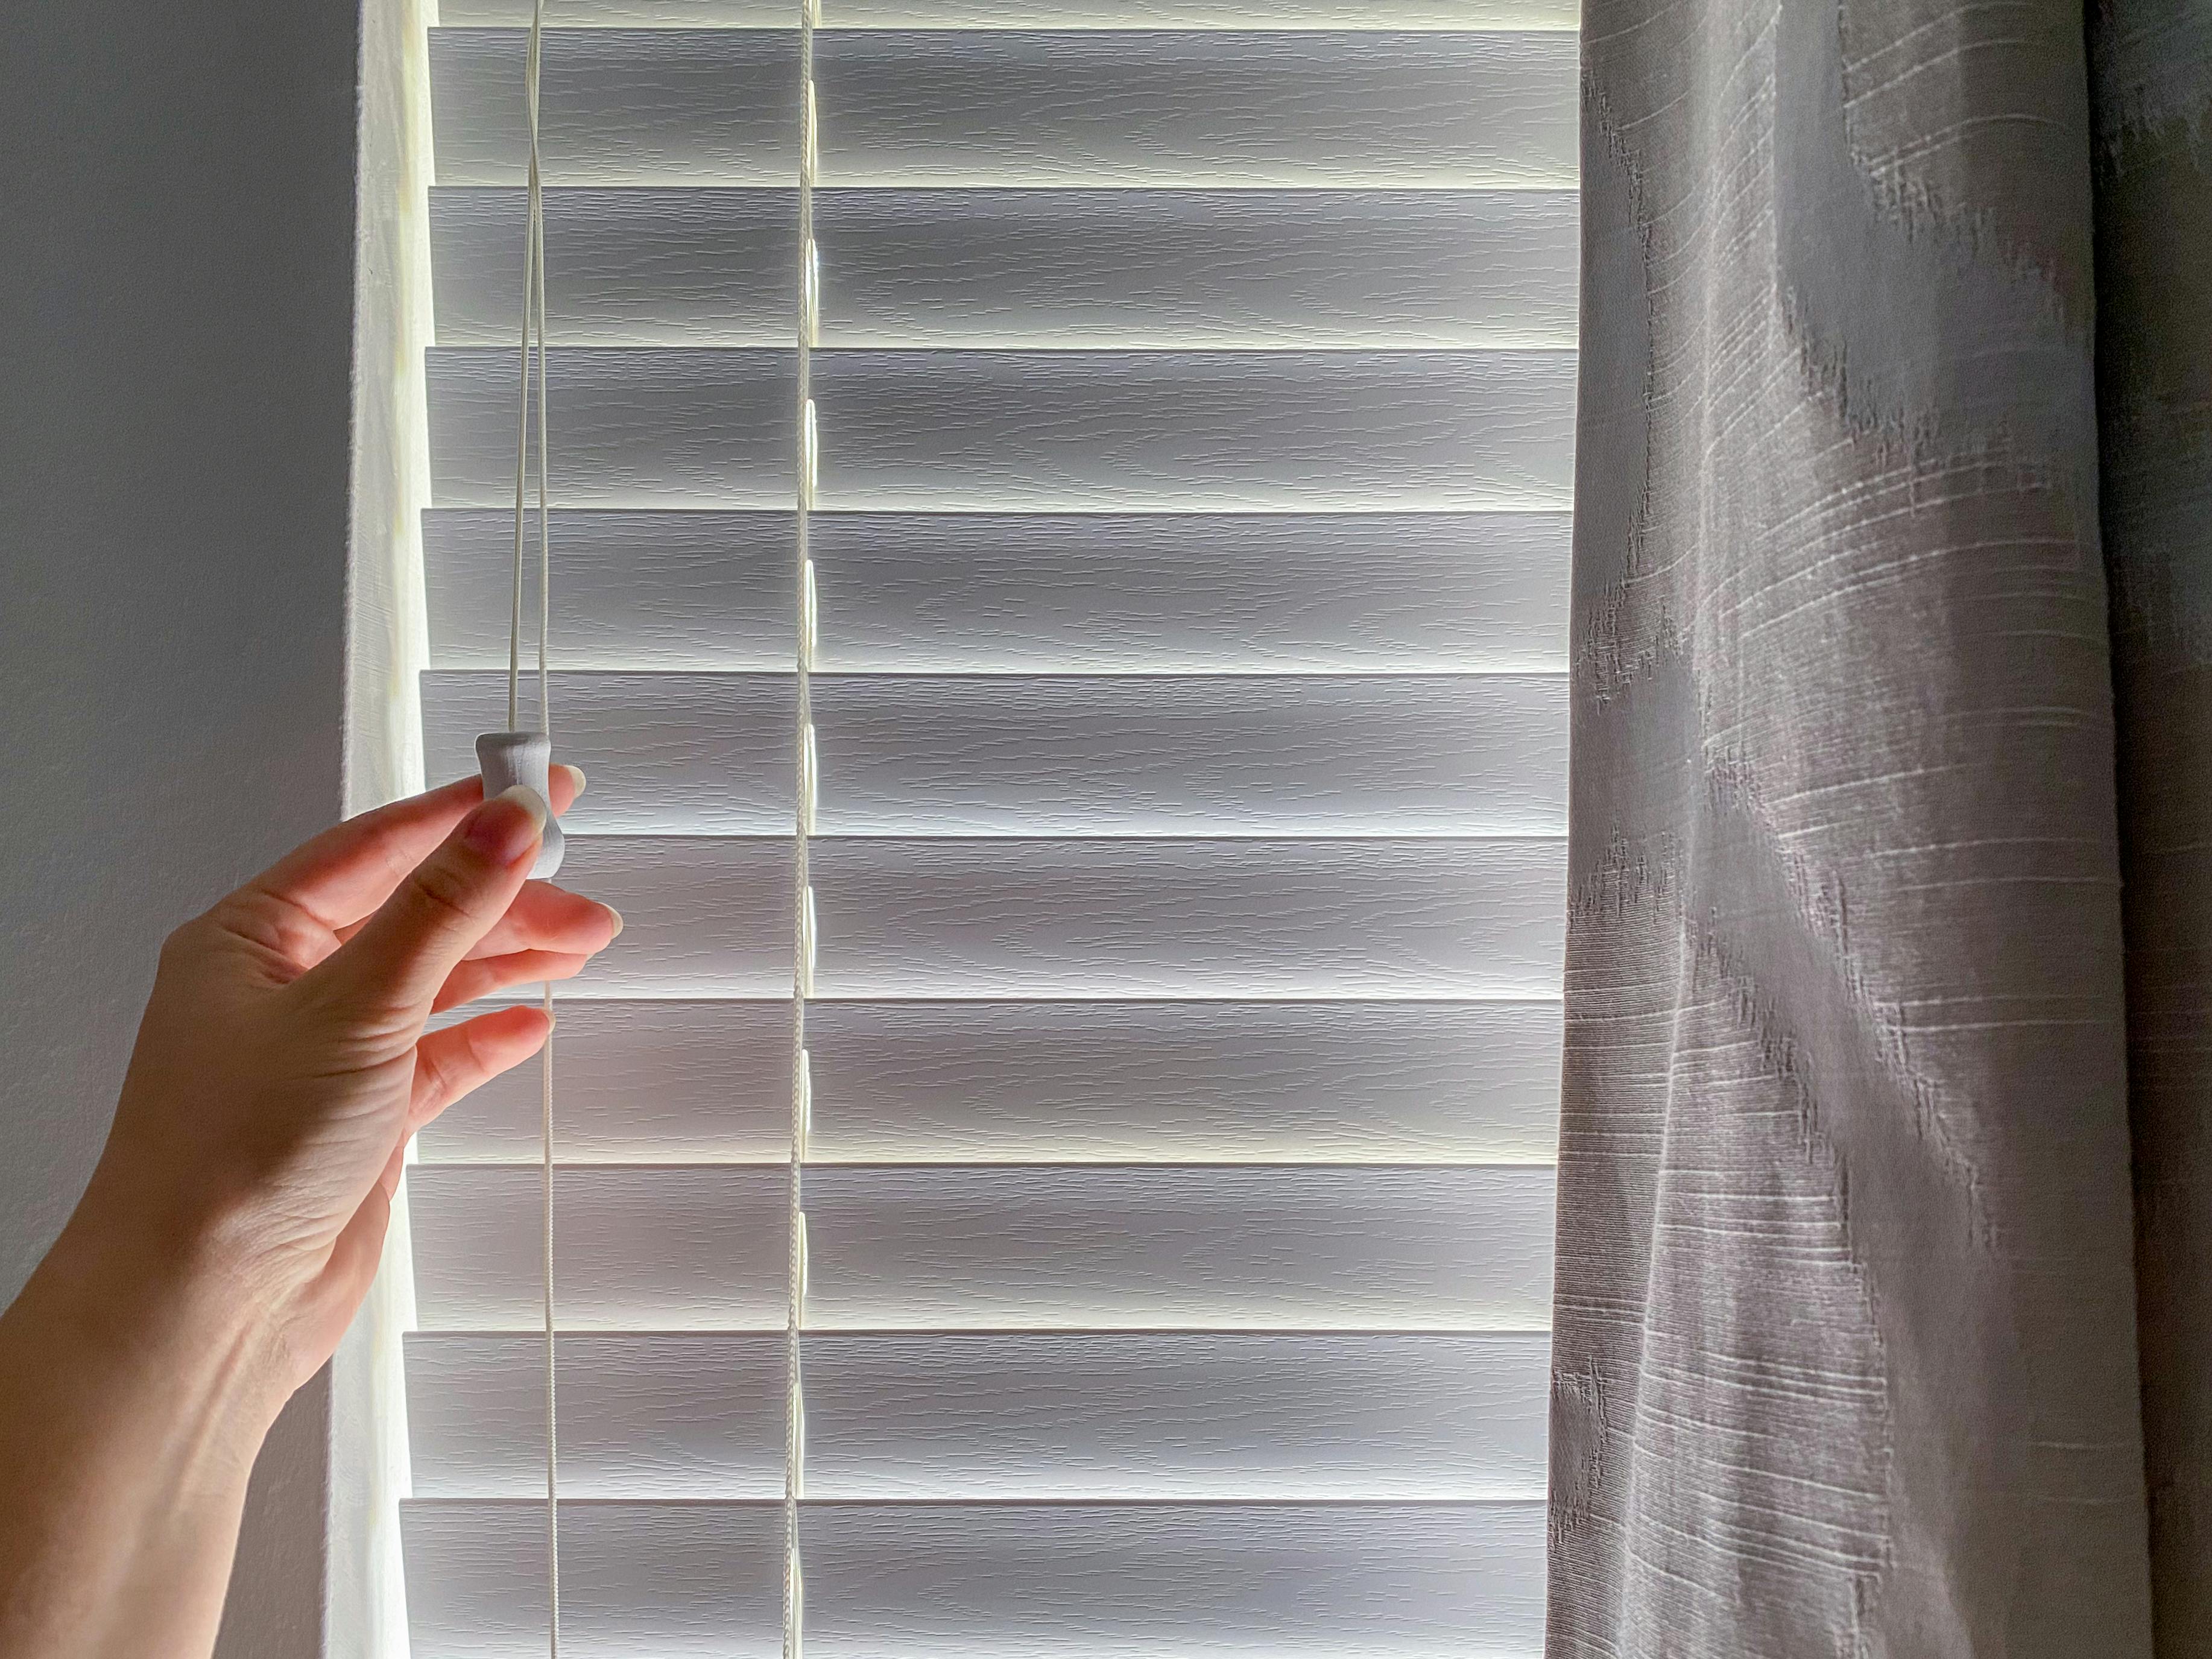 A person's hand closing the blinds of a window where the sun is shining through.